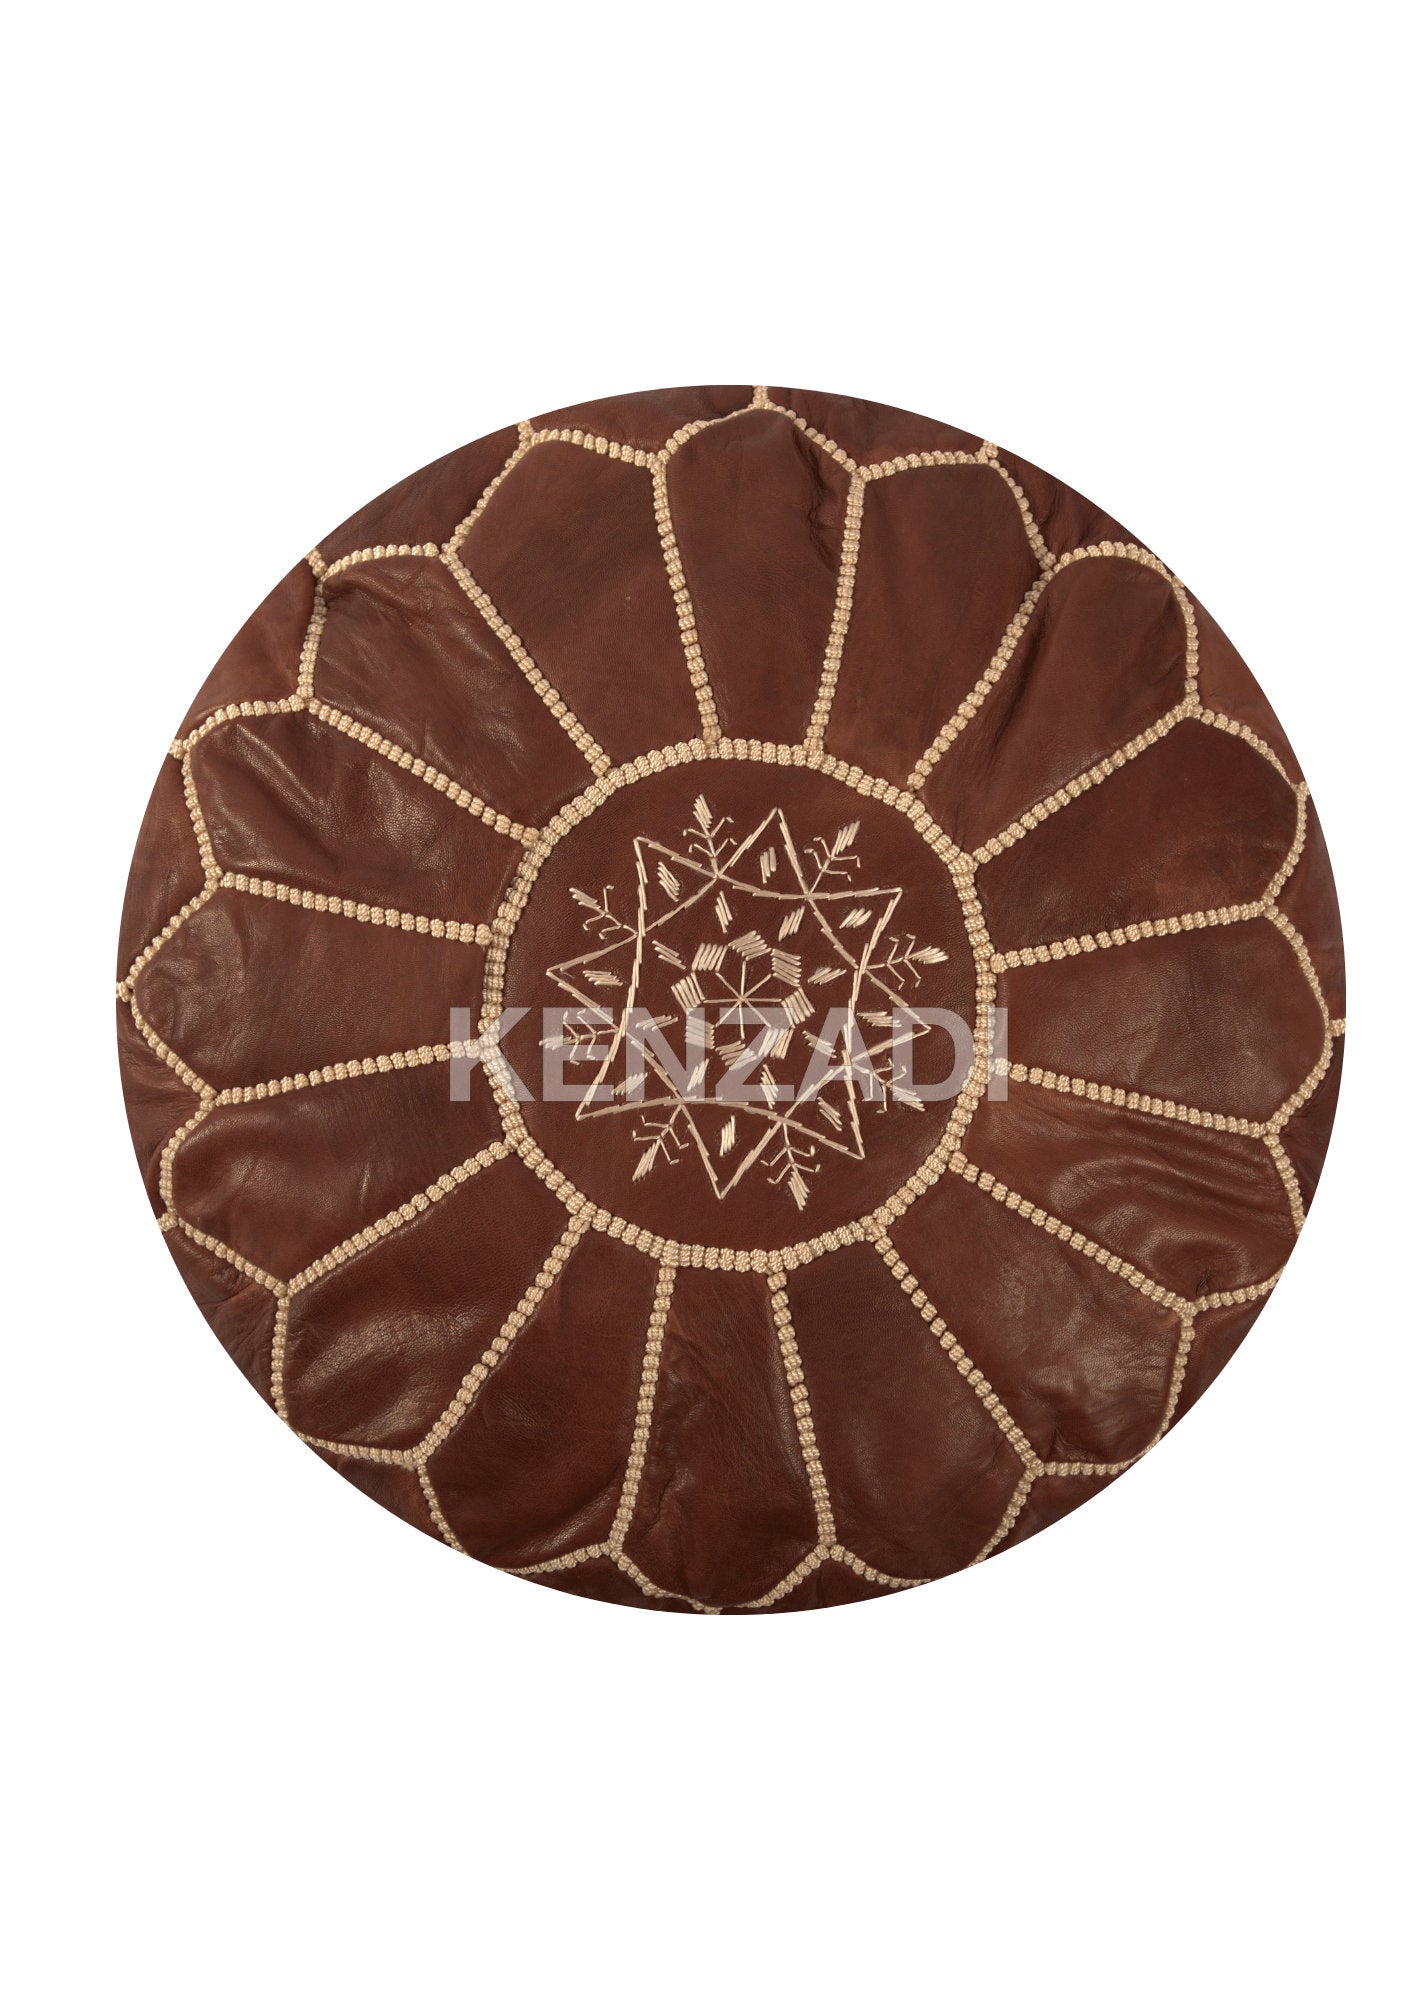 Authentic round Moroccan leather pouf with tan leather and beige embroidery - perfect for adding a bohemian touch to your home décor.